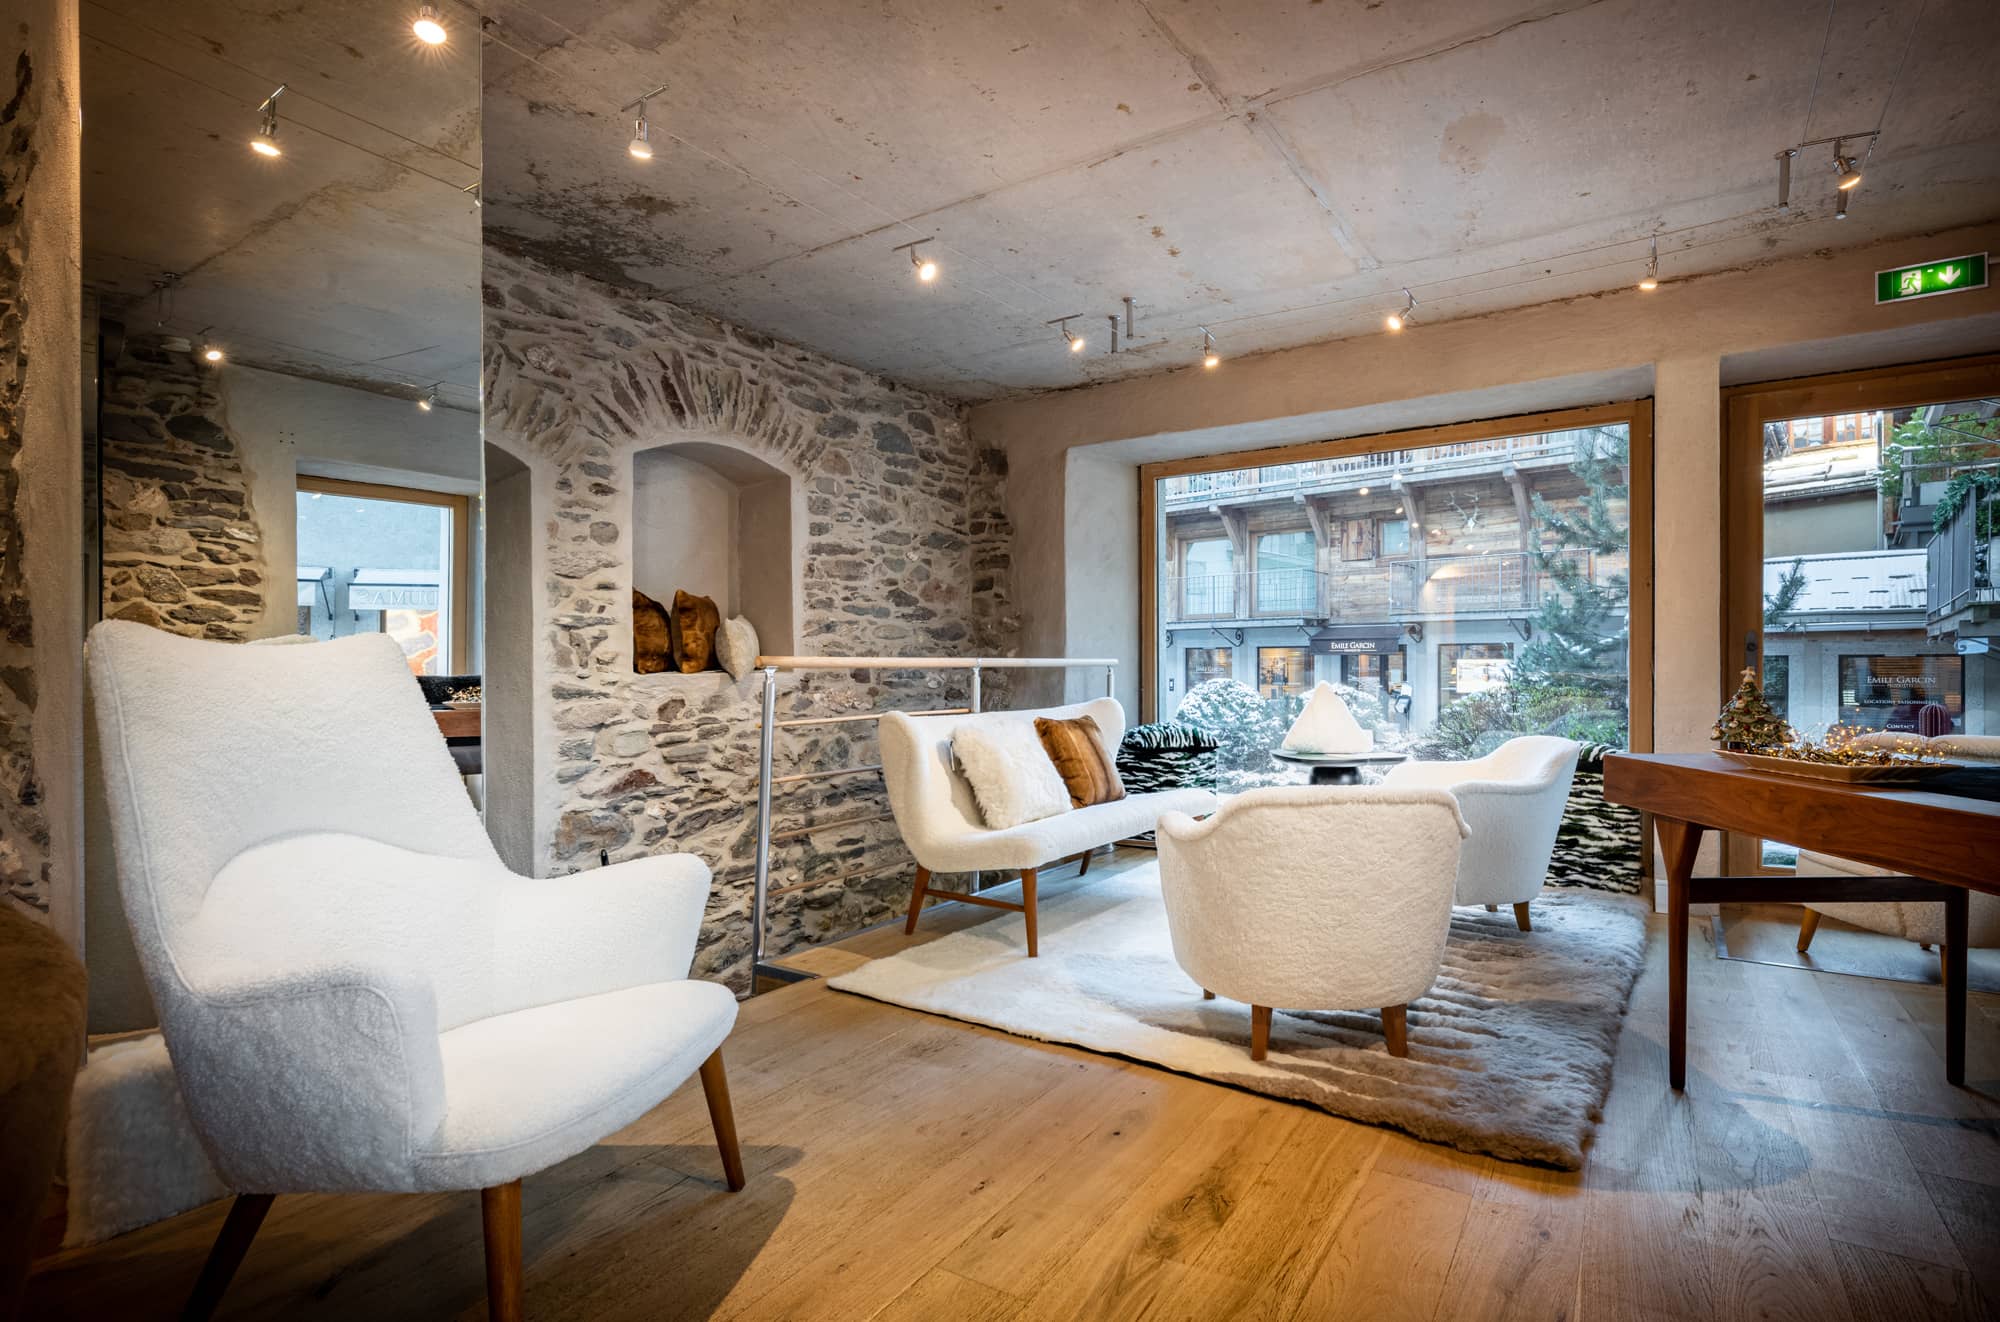 White vintage armchair in Norki Alps France showrrom at Megeve